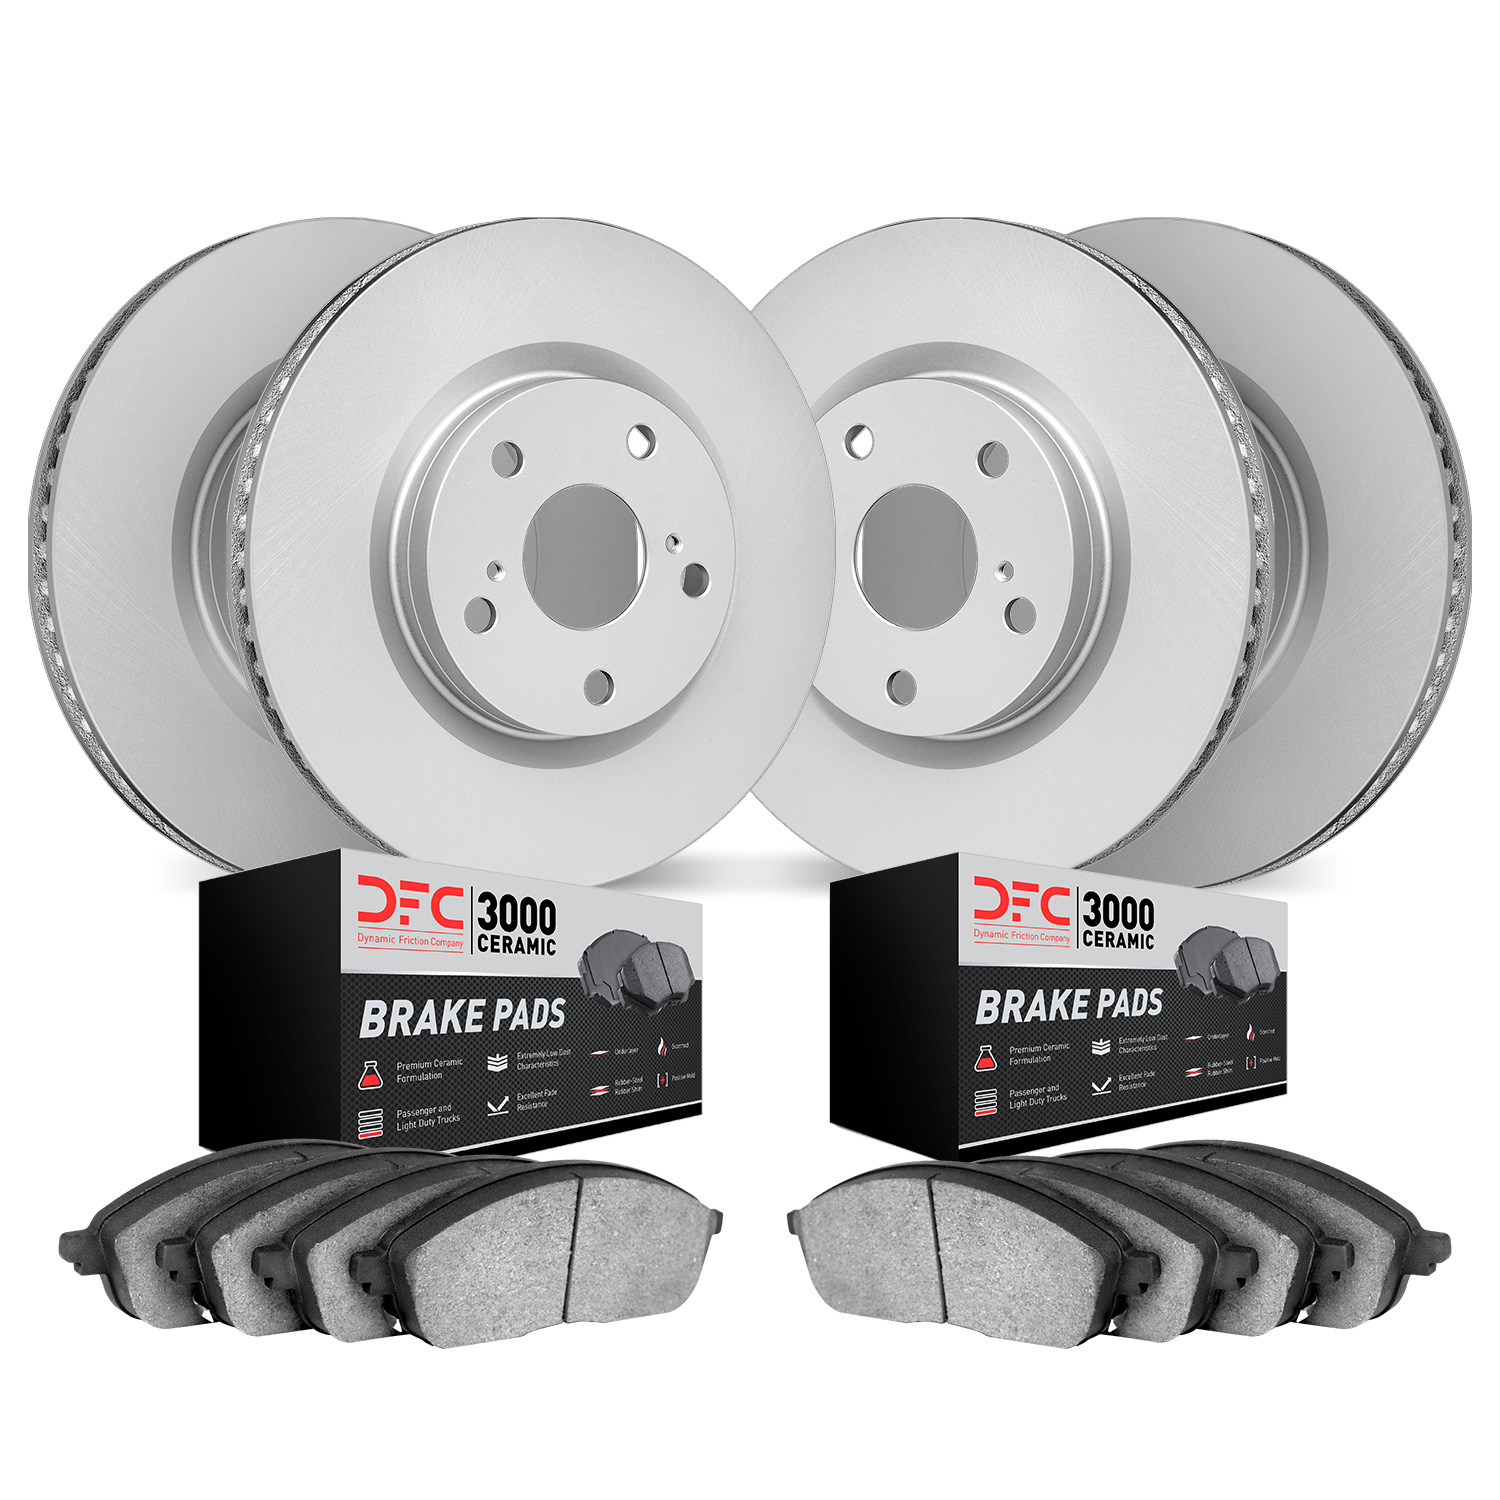 4304-42020 Geospec Brake Rotors with 3000-Series Ceramic Brake Pads Kit, Fits Select Mopar, Position: Front and Rear